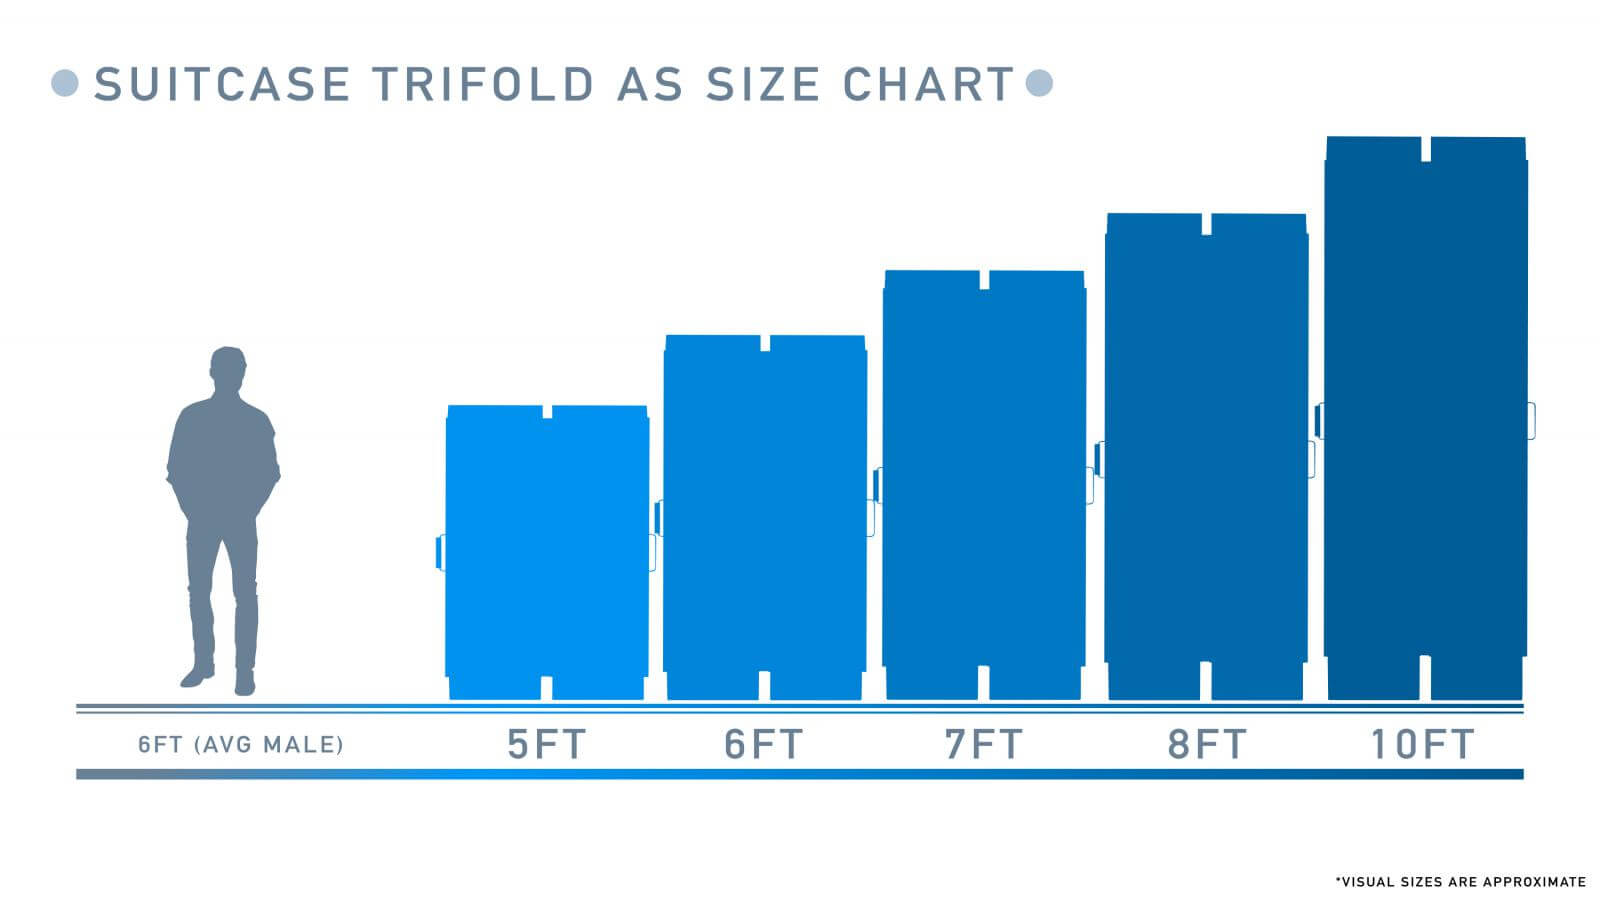 Illustration of Suitcase Trifold AS Ramp Size Chart